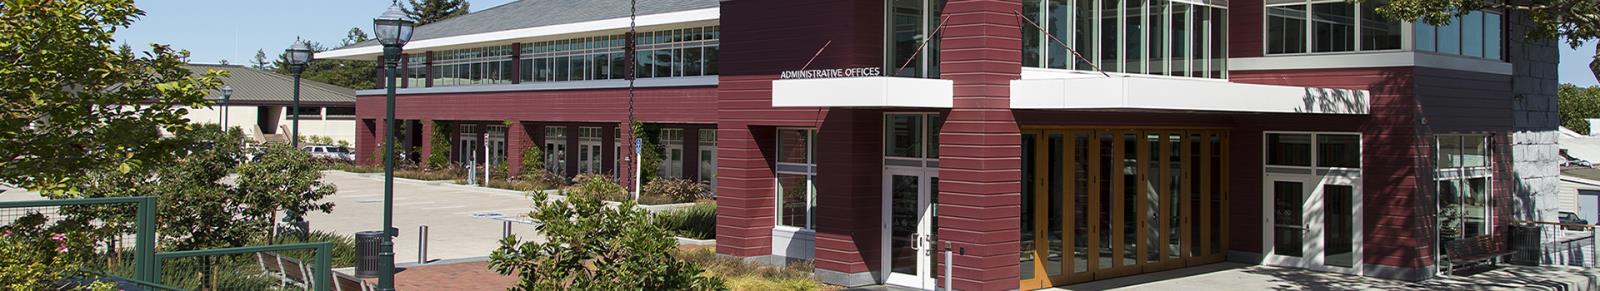 City of Novato Administrative Offices